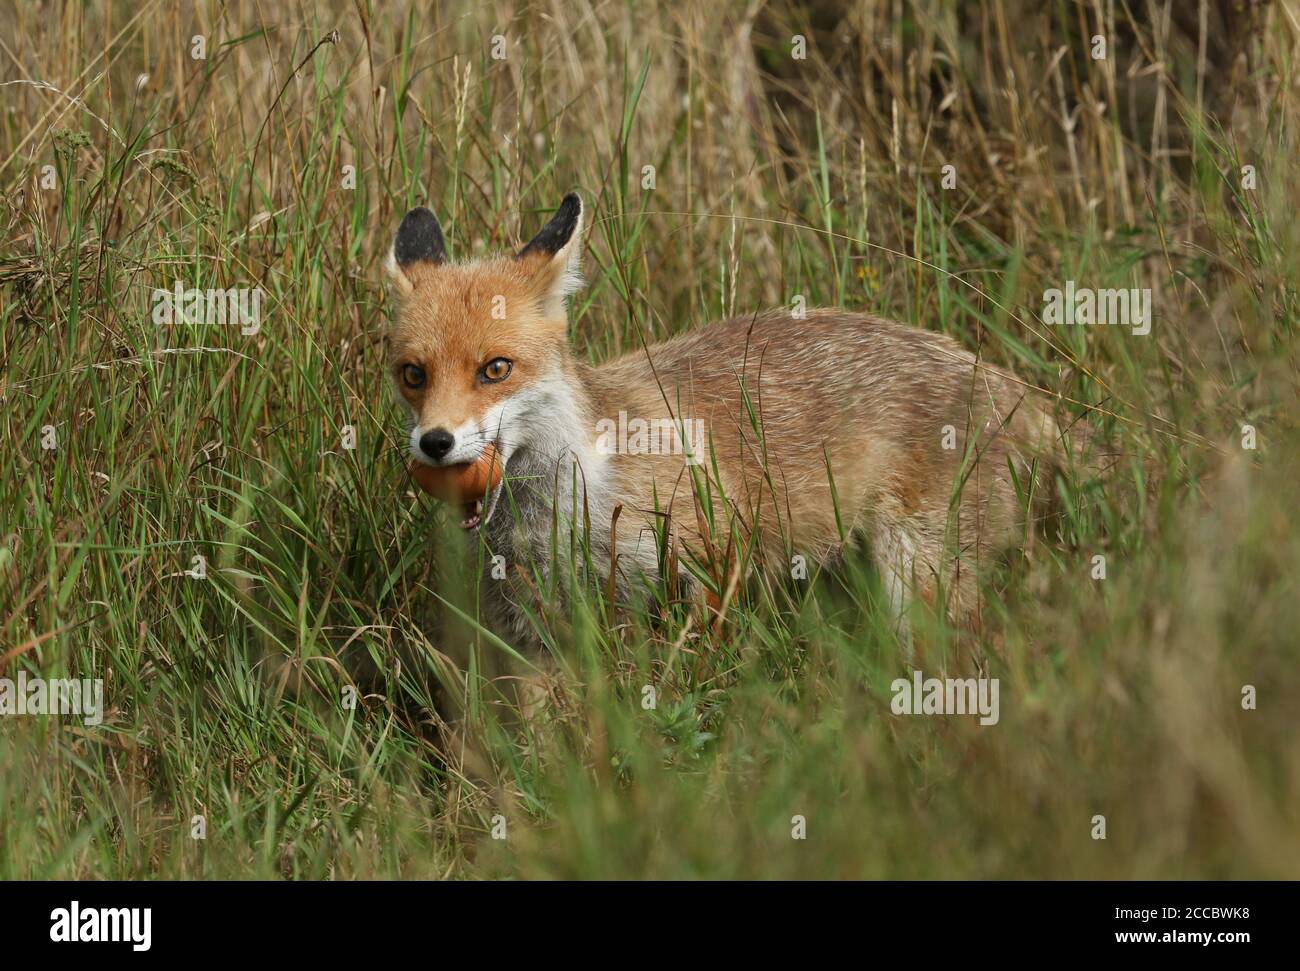 A wild Red Fox, Vulpes vulpes, walking through a field with an egg in its mouth. Stock Photo